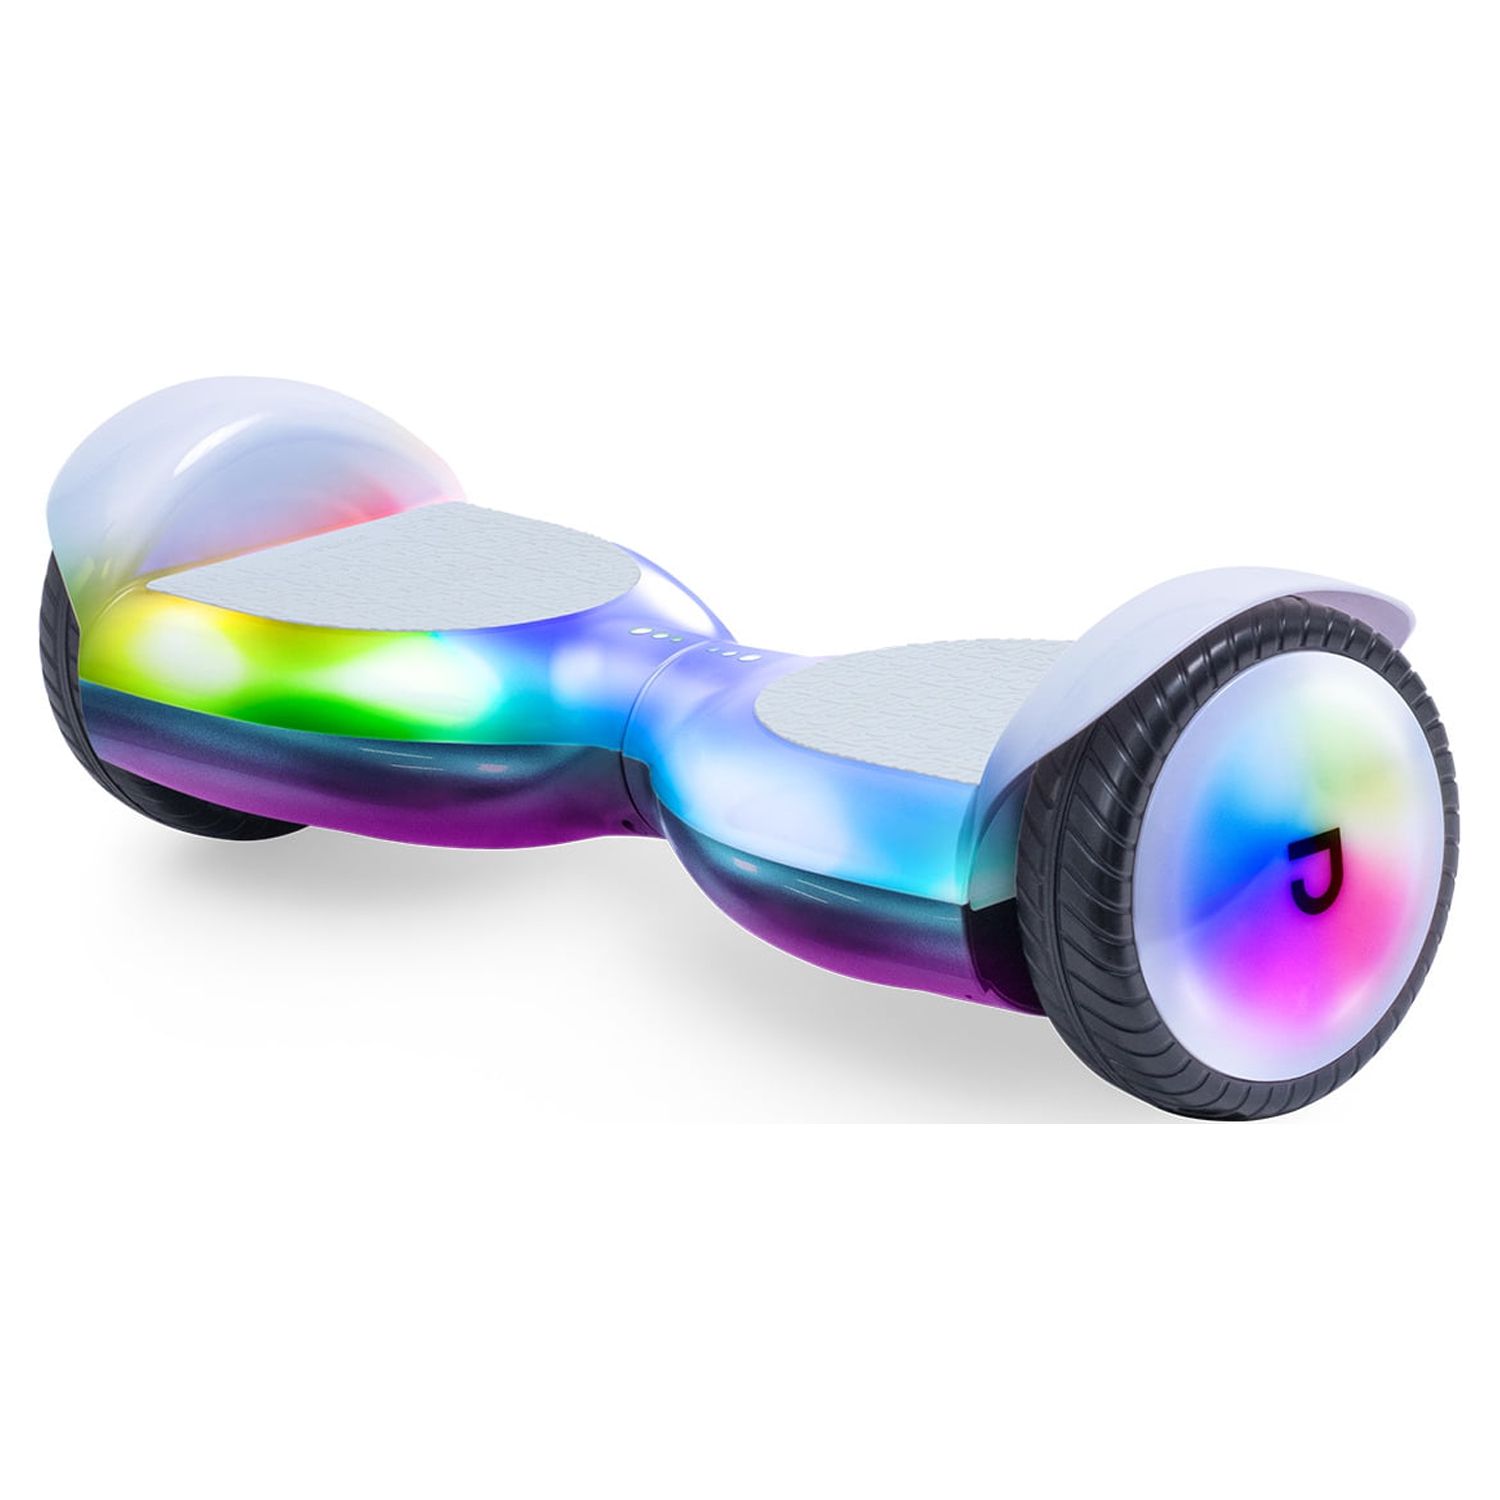 Jetson Plasma X Lava Tech Hoverboard, Ages 12+ - image 1 of 13